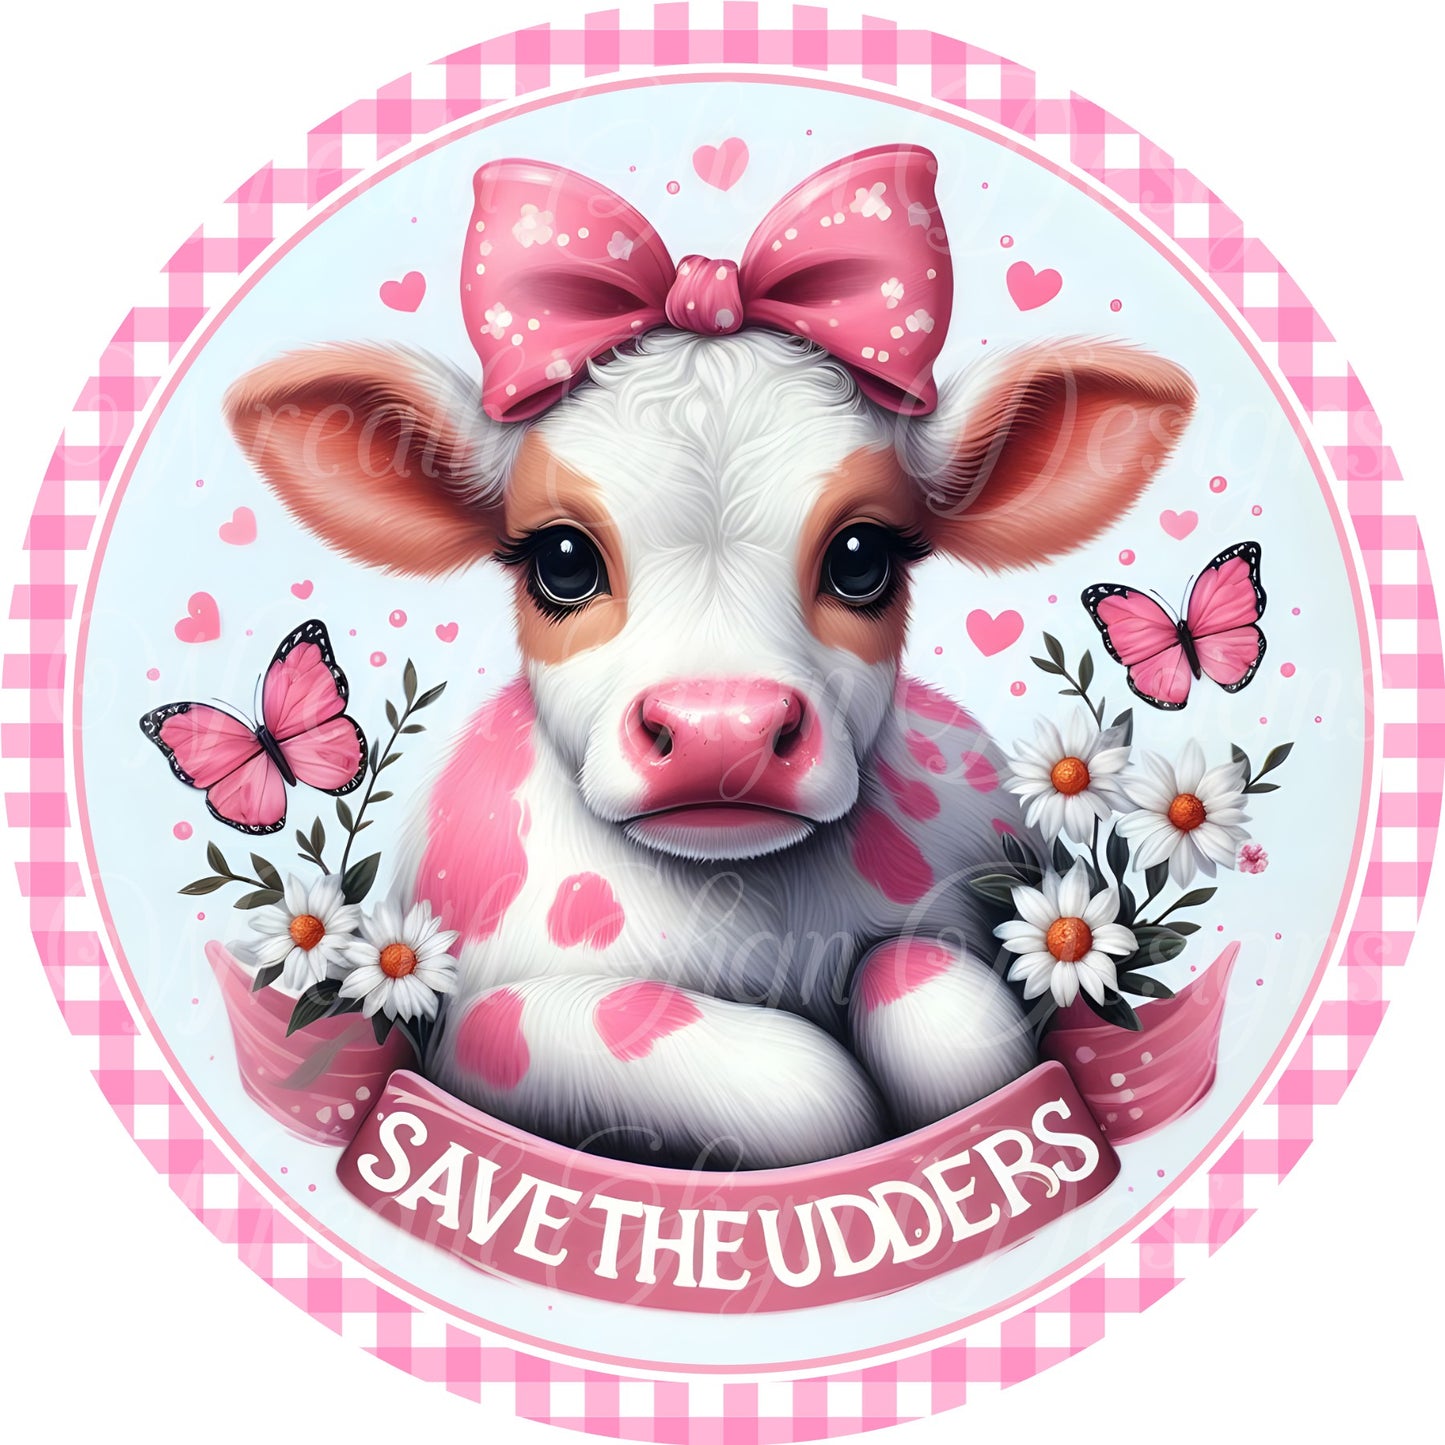 sublimated metal  cancer survivor wreath sign, breast cancer awareness ribbon, pink awareness ribbon, Save the udders cow sign